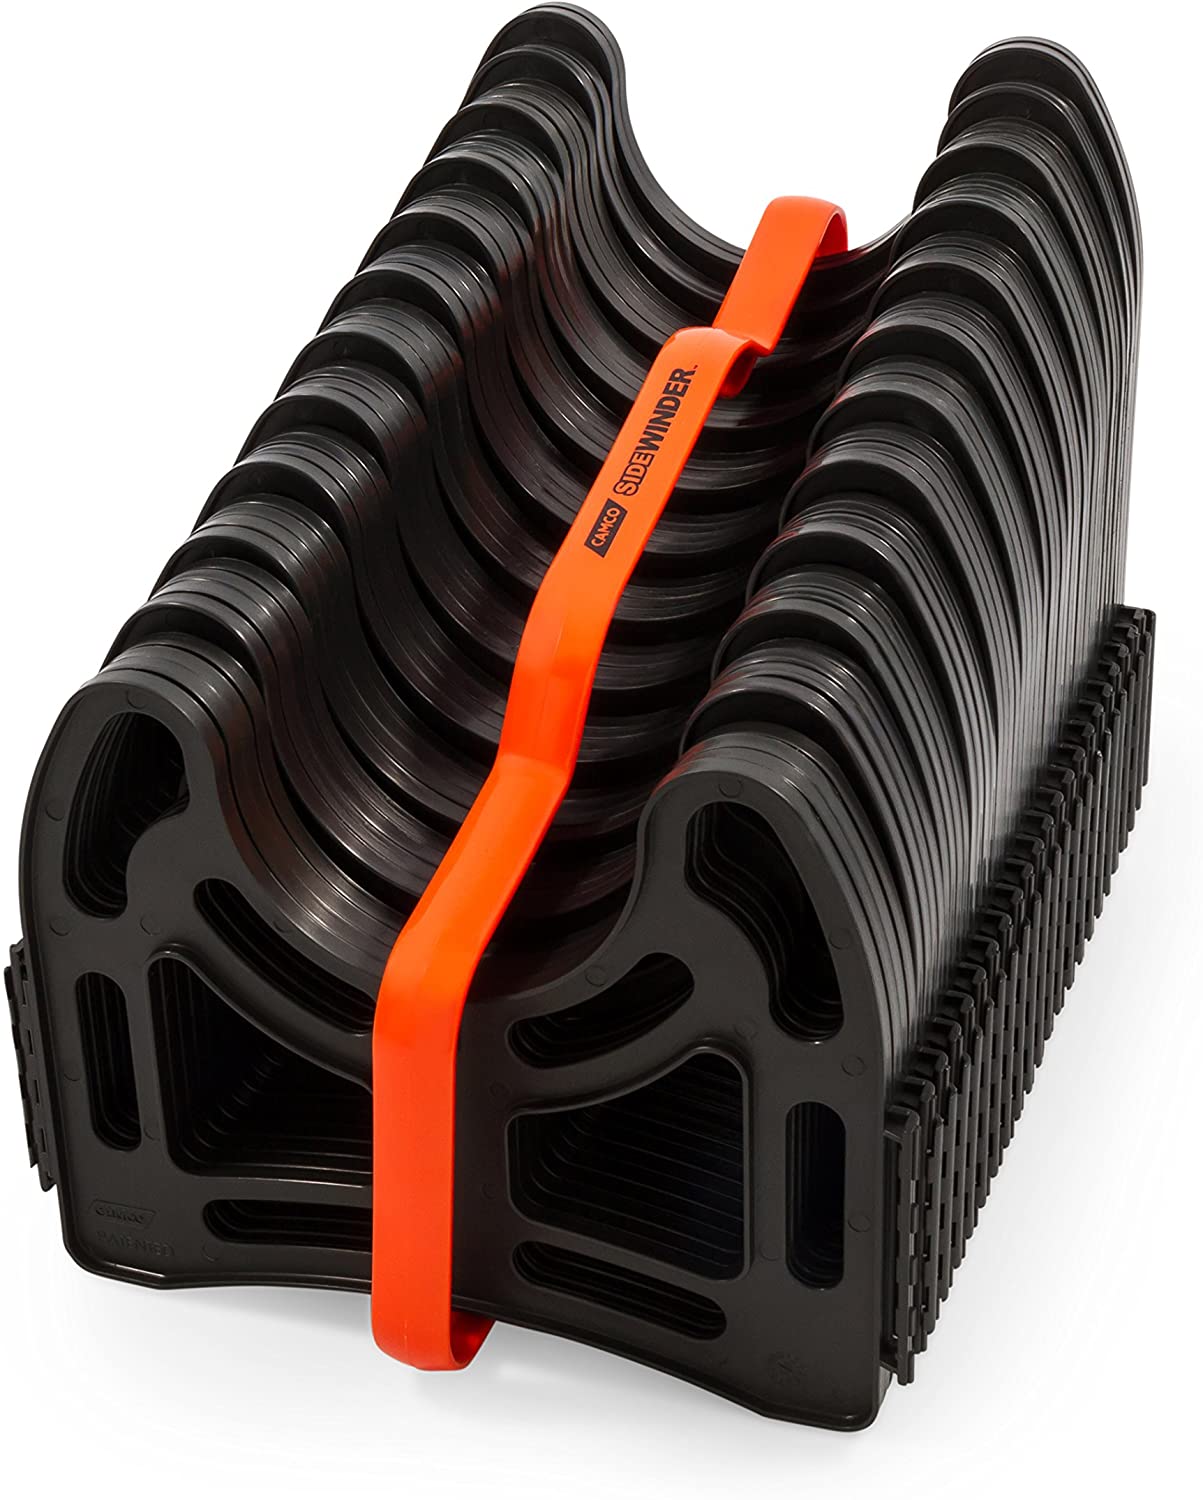 Camco sewer hose support